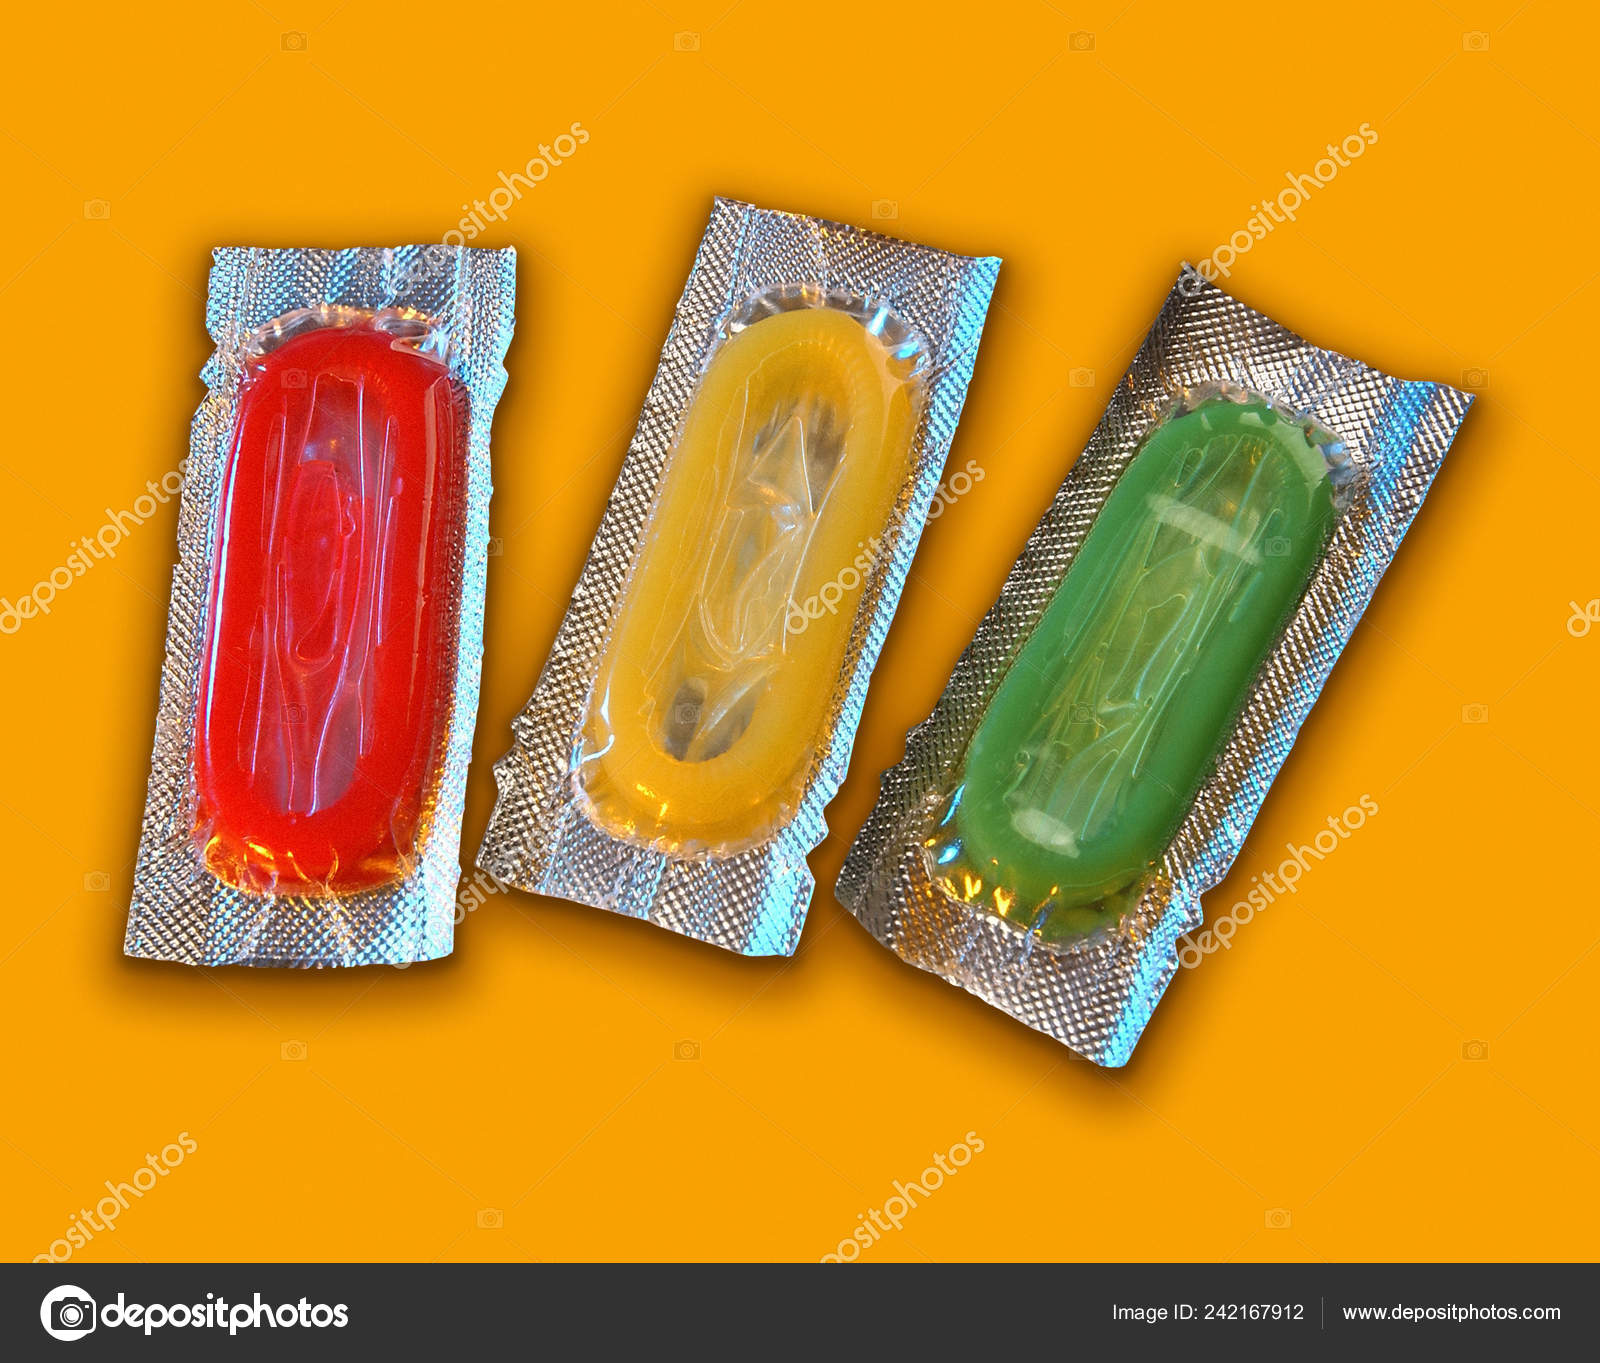 Download Red Yellow Green Condoms Foil Wrappers Yellow Background Stock Photo C Danjmh 242167912 Yellowimages Mockups